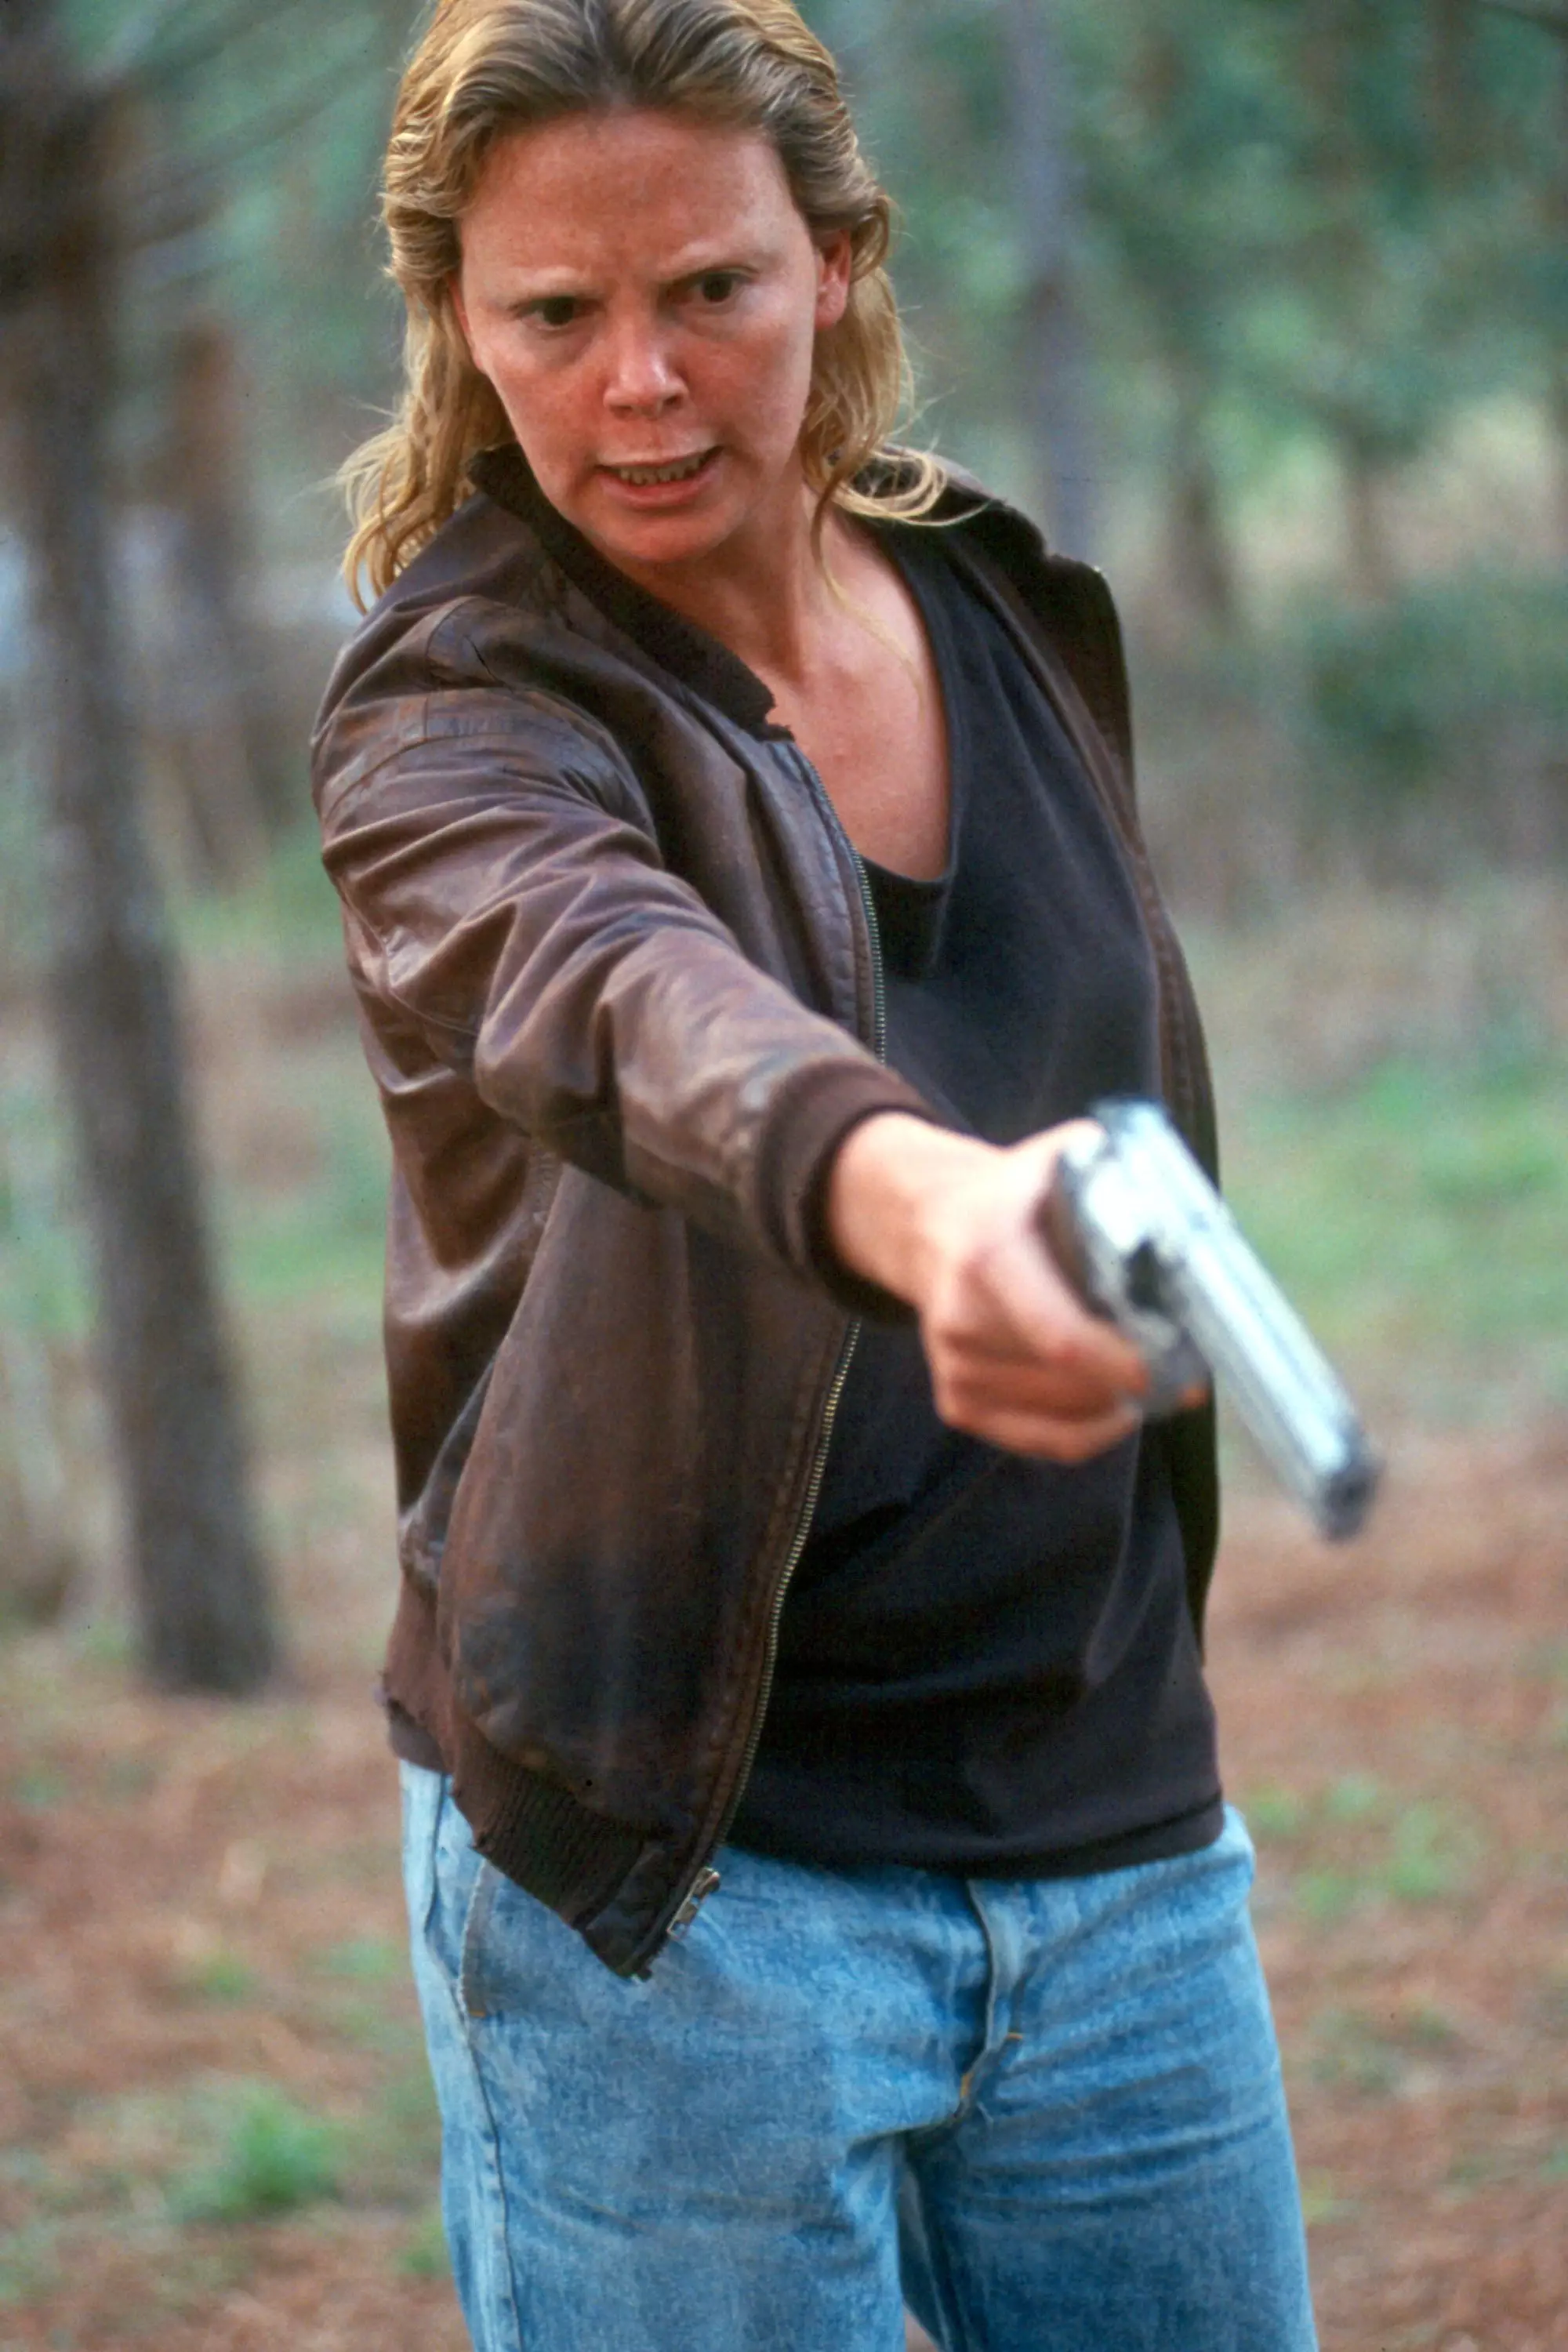 Charlize Theron depicted Aileen Wuornos in 2003's 'Monster' (